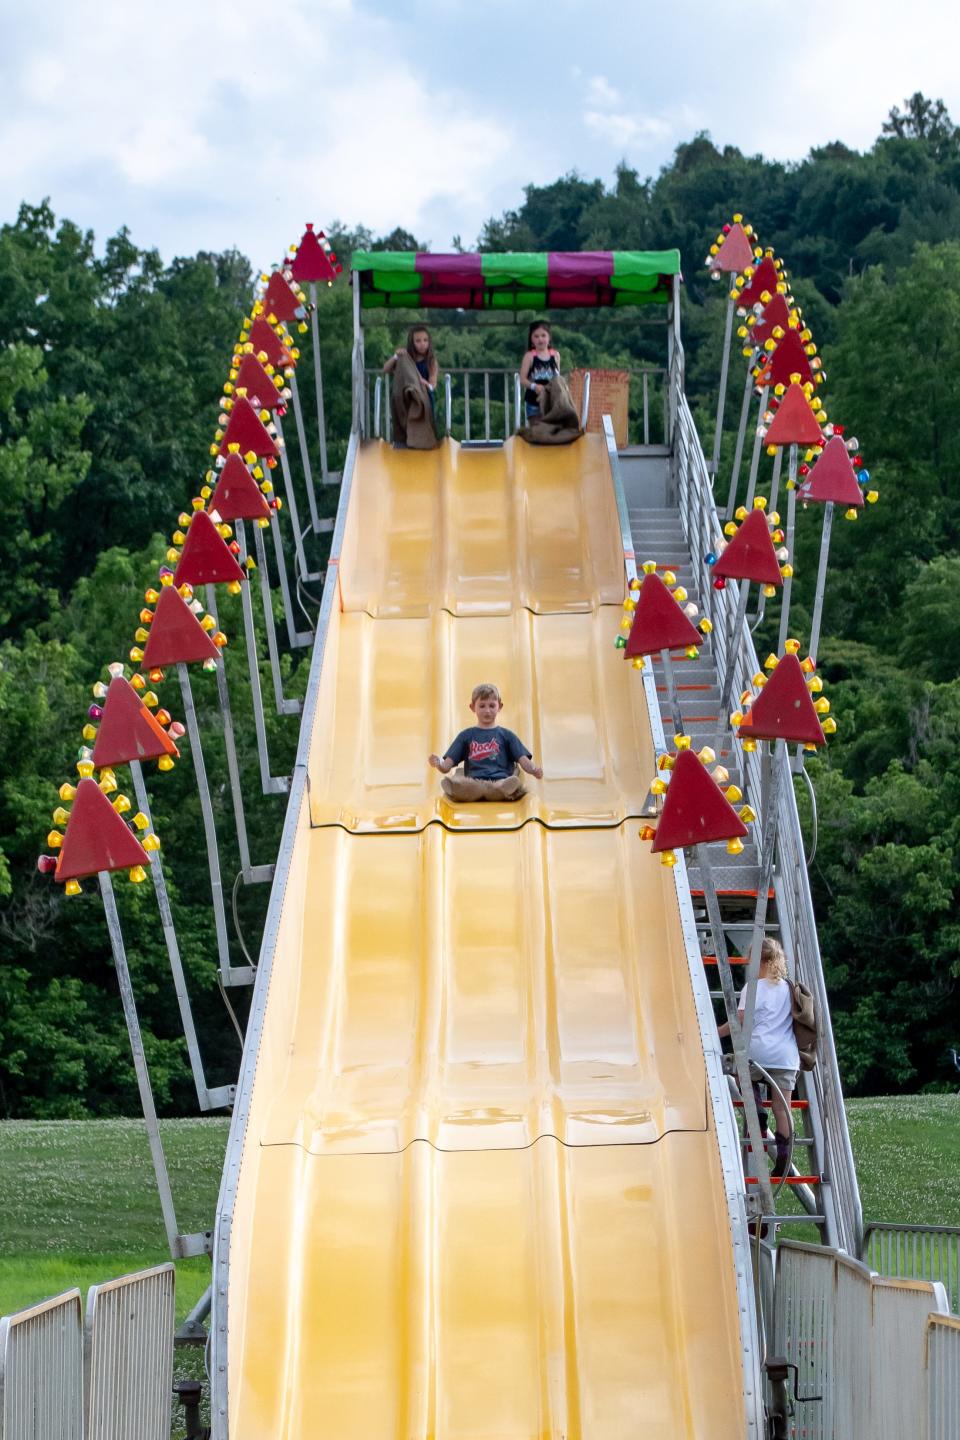 Kids take turns sliding down an enormous slide set up with the carnival rides at the Ohio Hills Folk Festival in Quaker City. The four-day event highlighted local artisans, hosts a car show, and multiple parades.